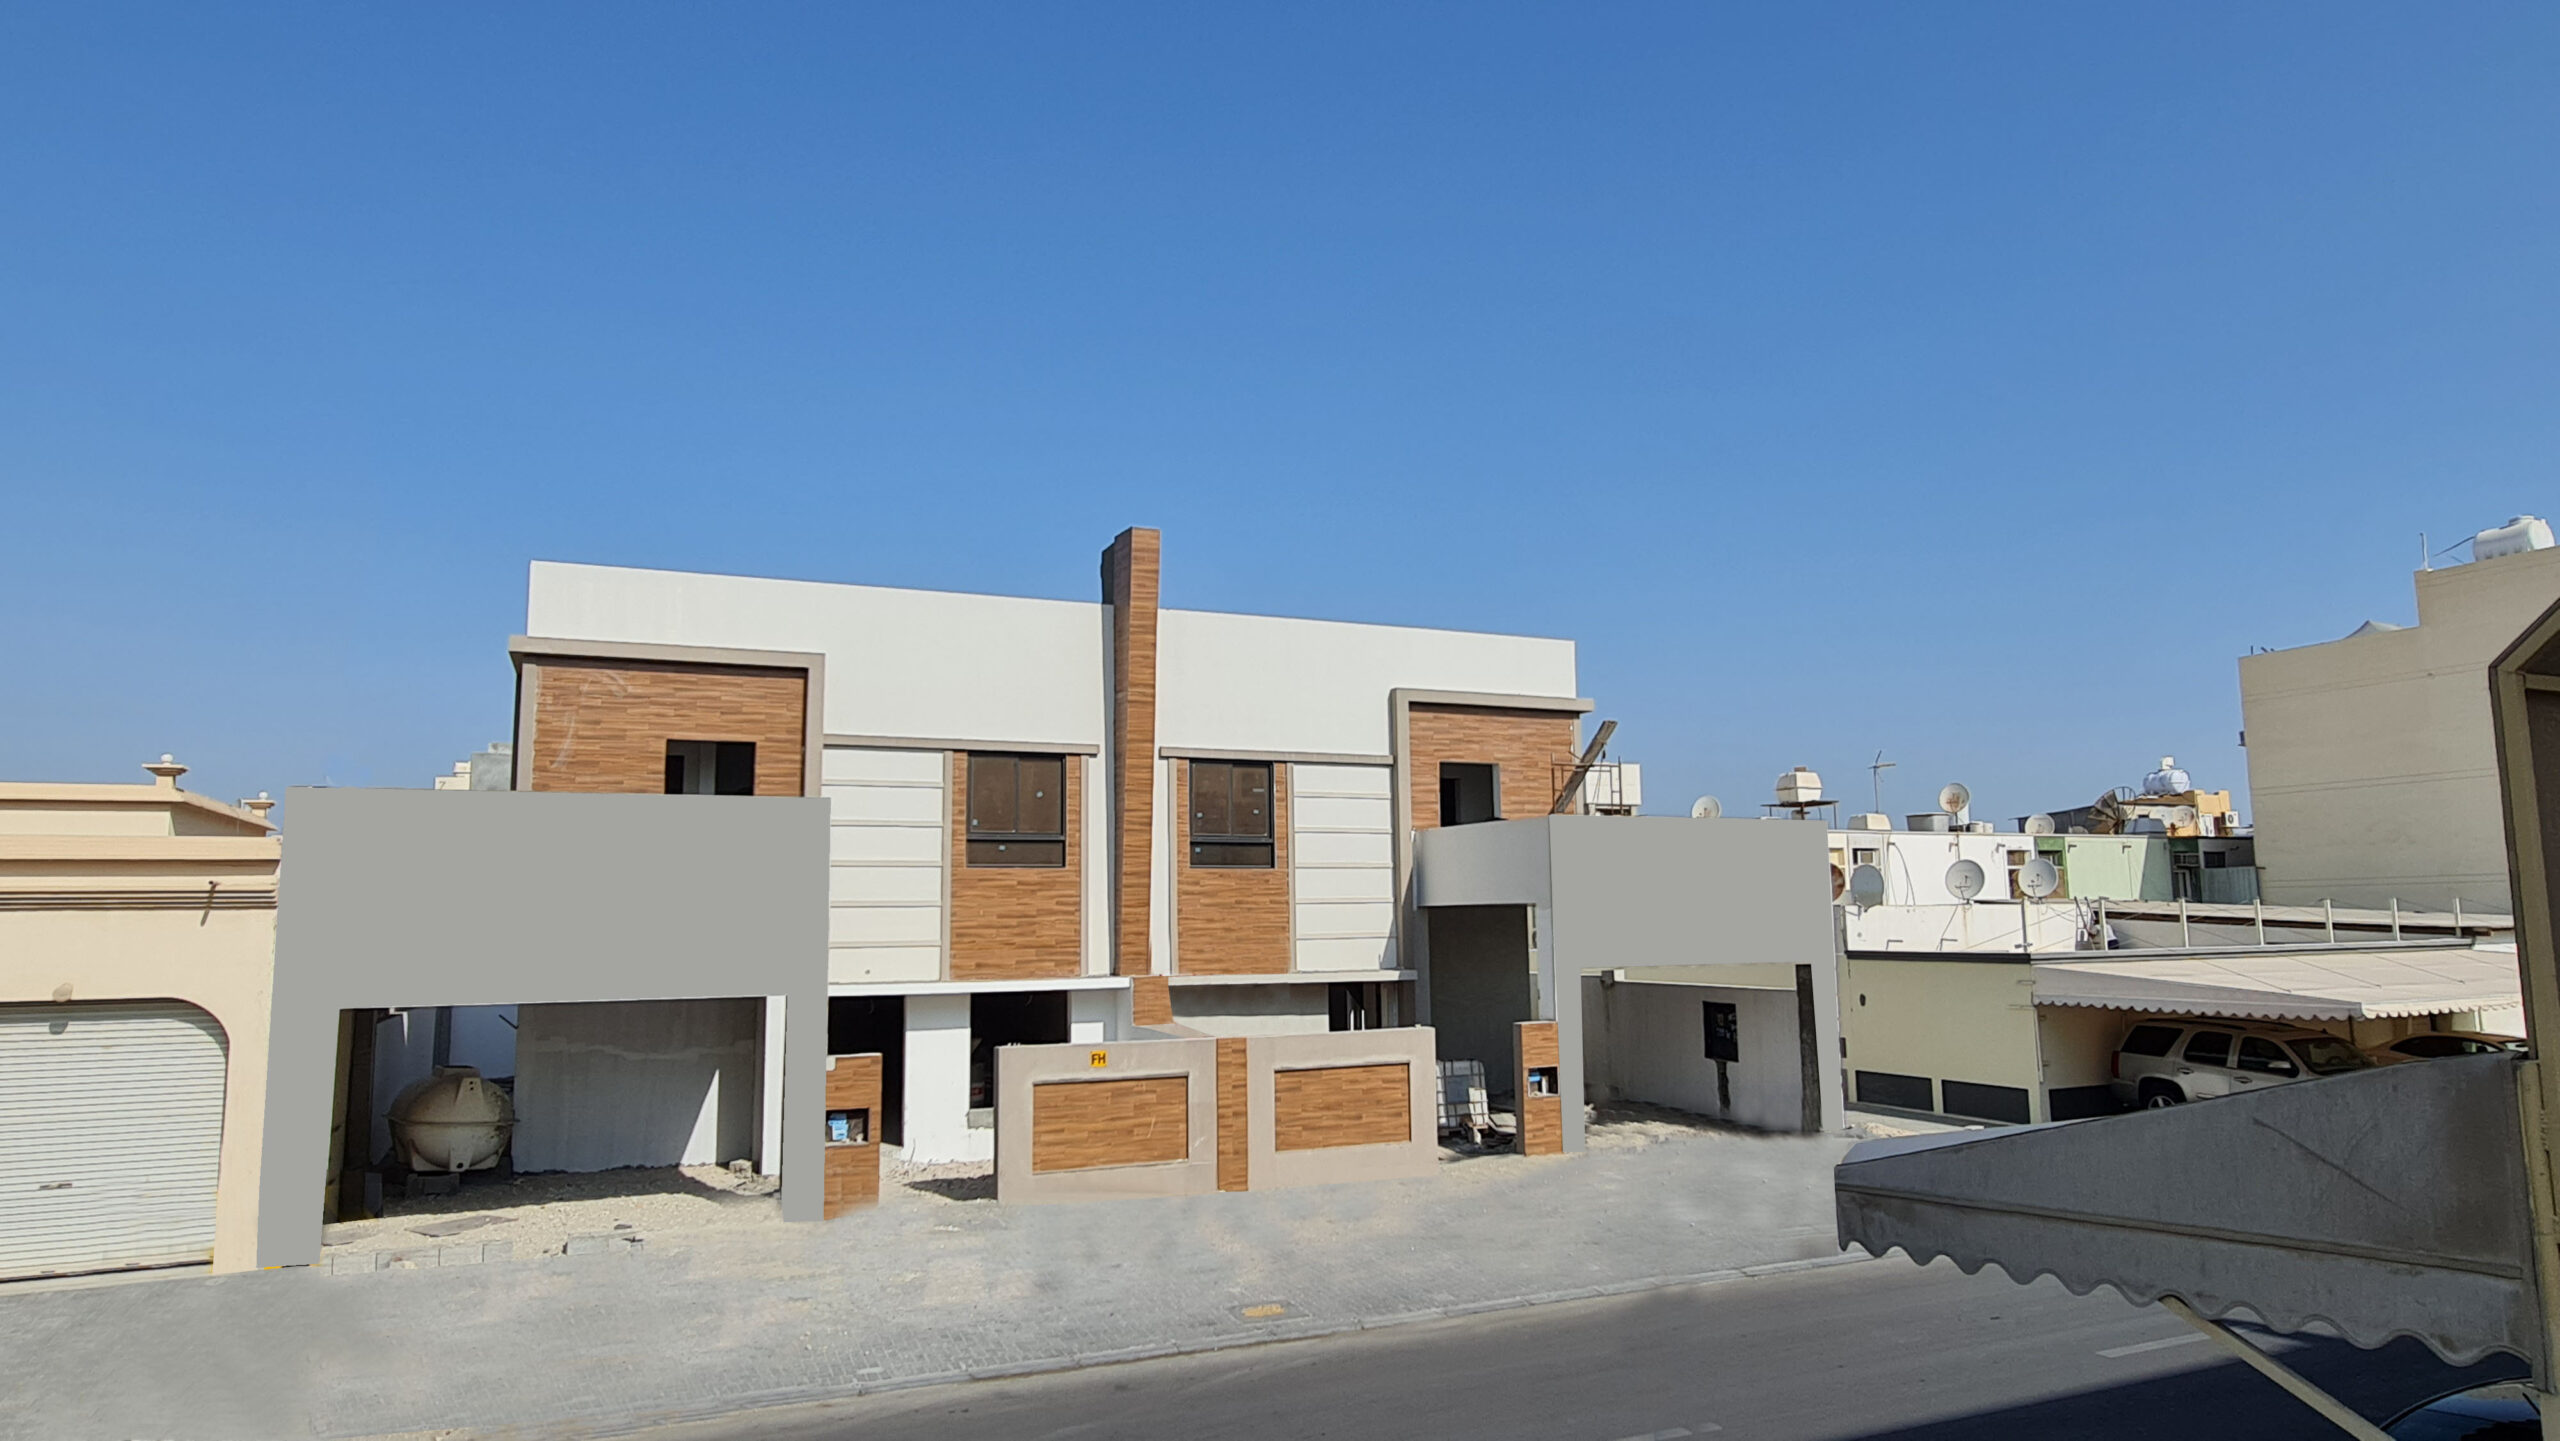 Three luxury villas for sale located in Isa Town